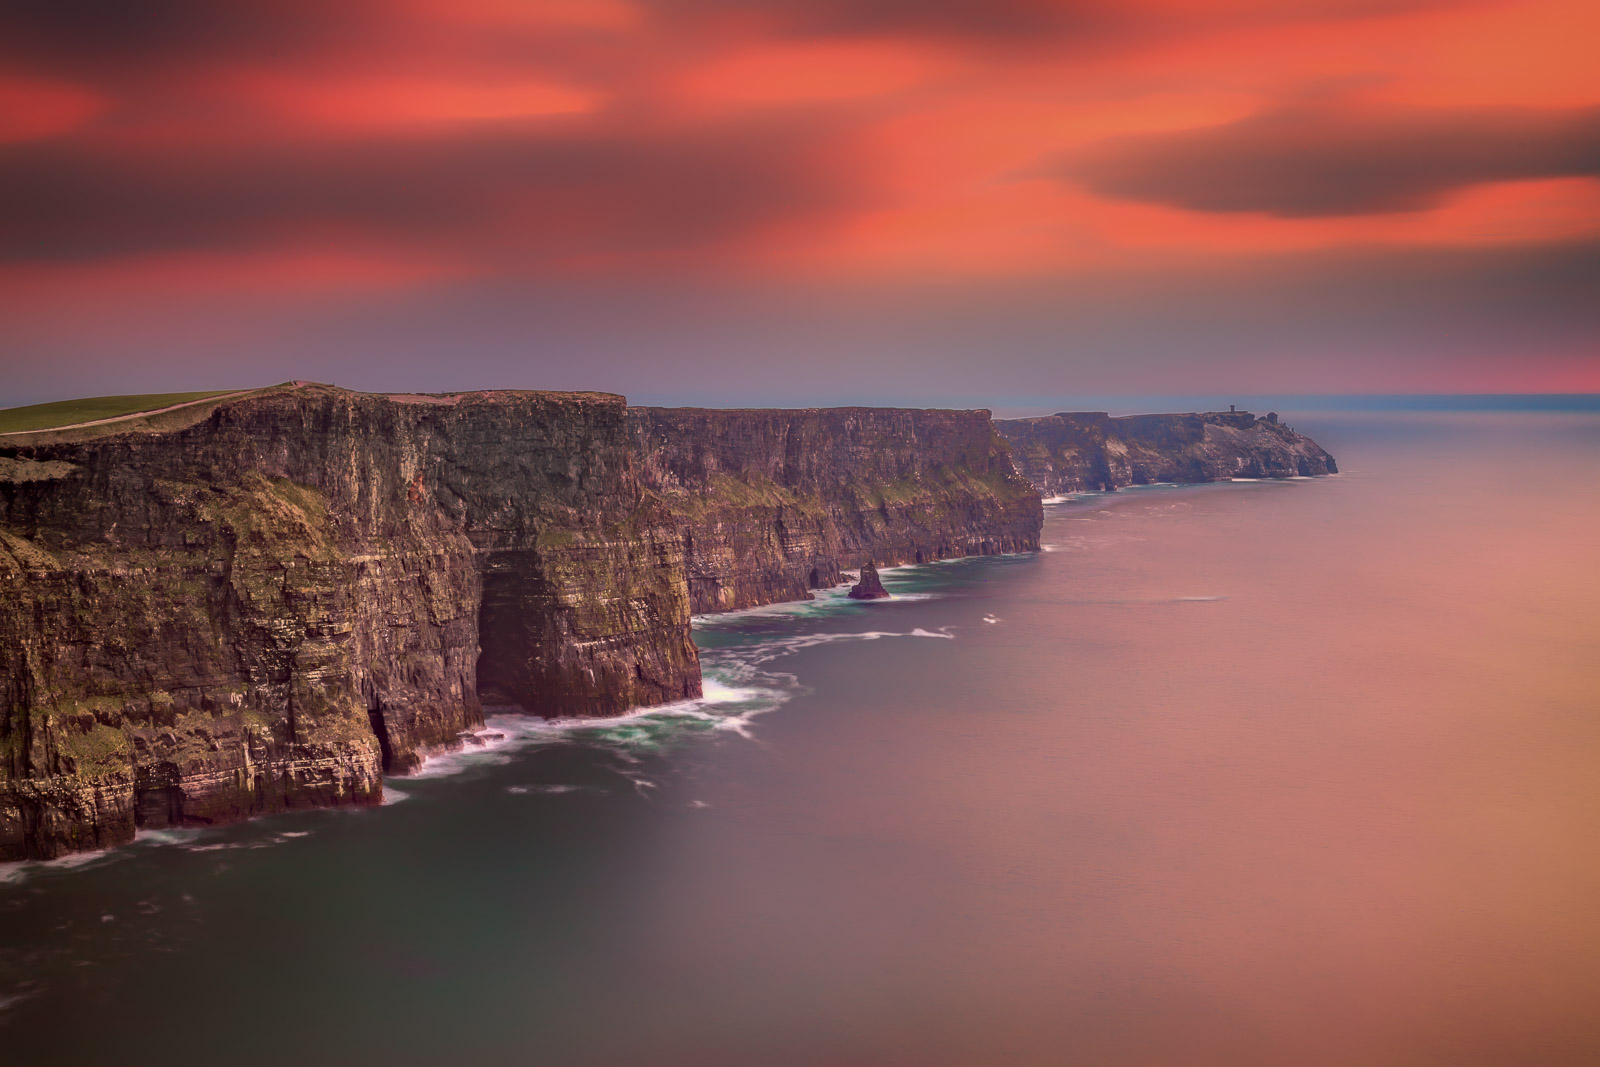 Cliffs of Moher near the City of Limerick